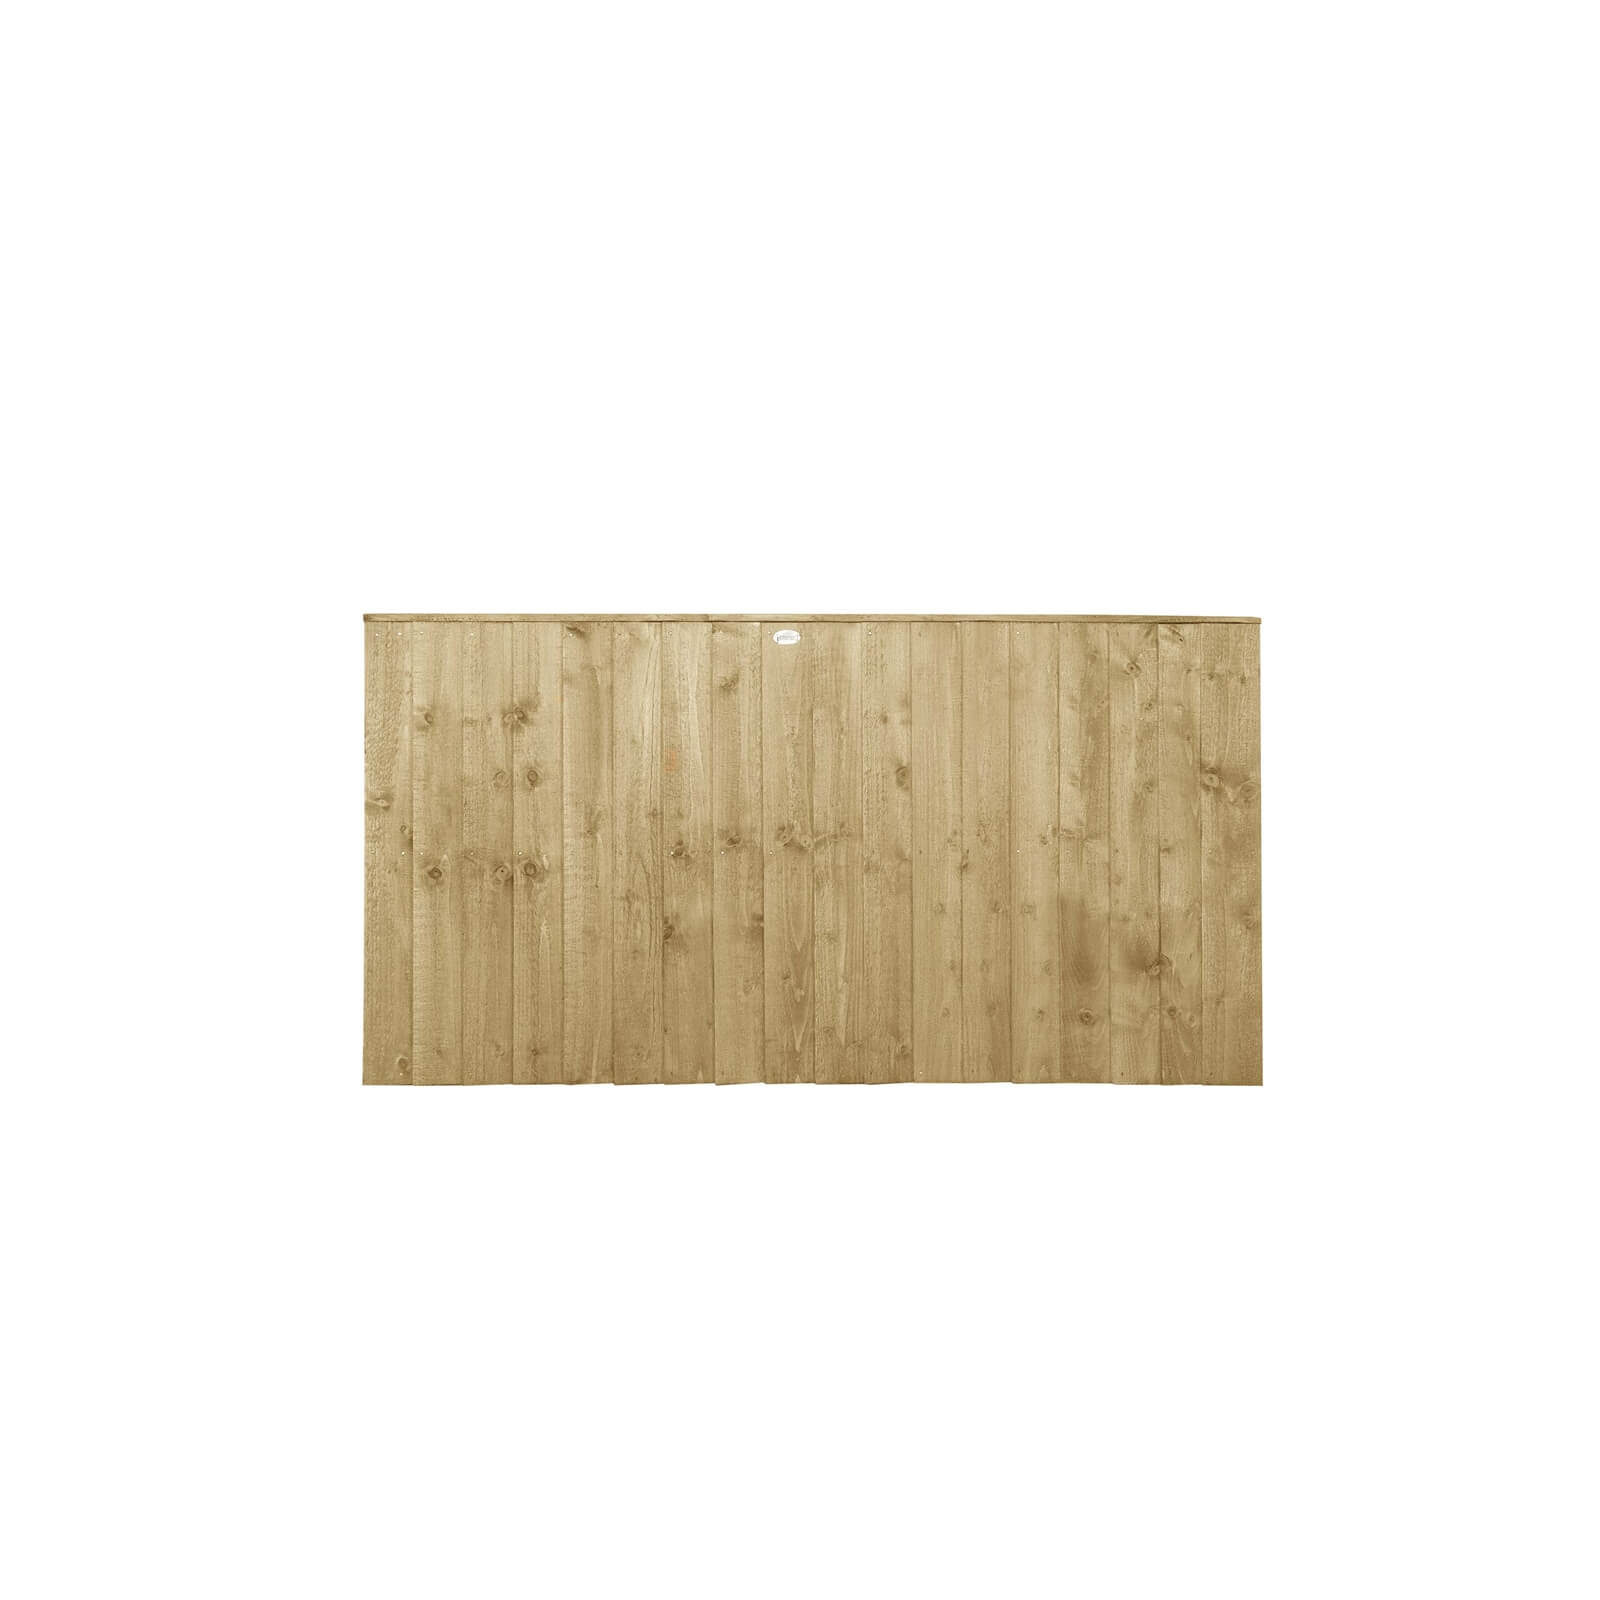 6ft x 3ft (1.83m x 0.93m) Pressure Treated Featheredge Fence Panel - Pack of 4